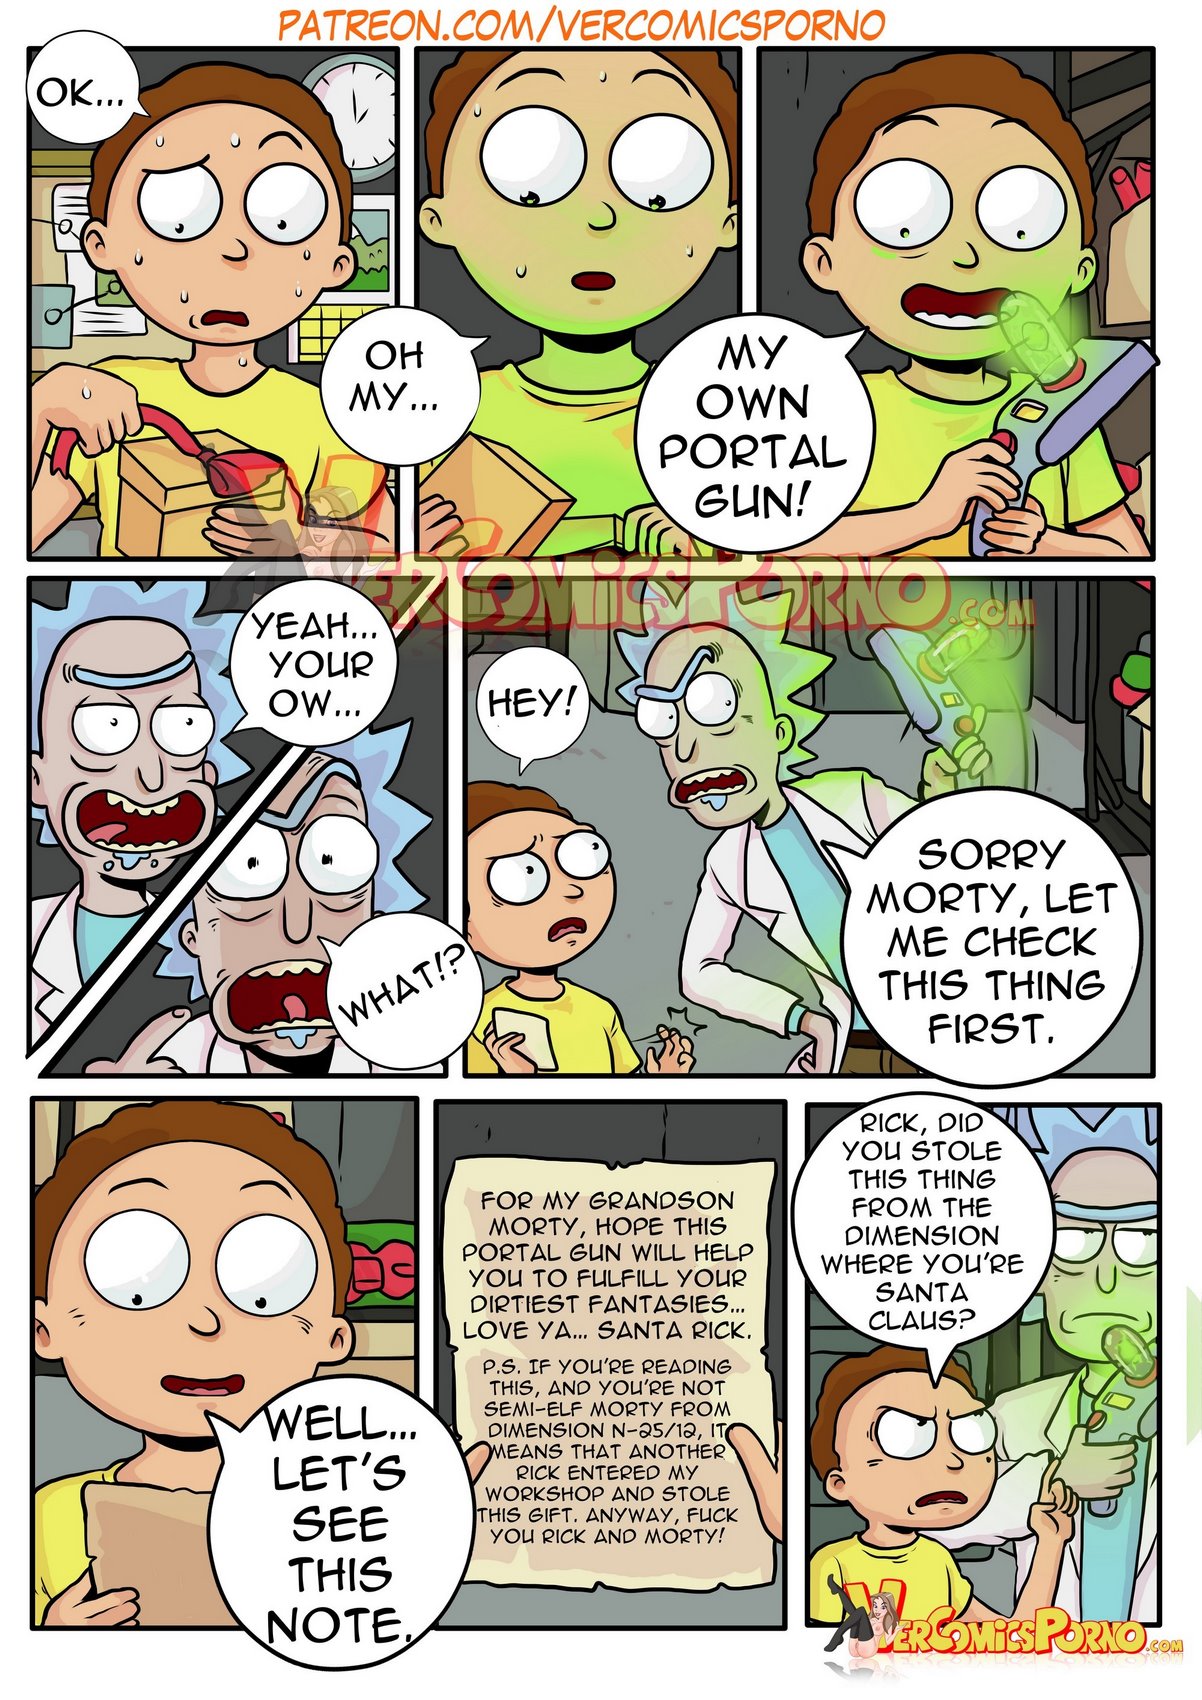 Cartoon Porn Rick Morty - Free Sex Pics, Best XXX Images and Hot Porn  Photos on www.metasex.net